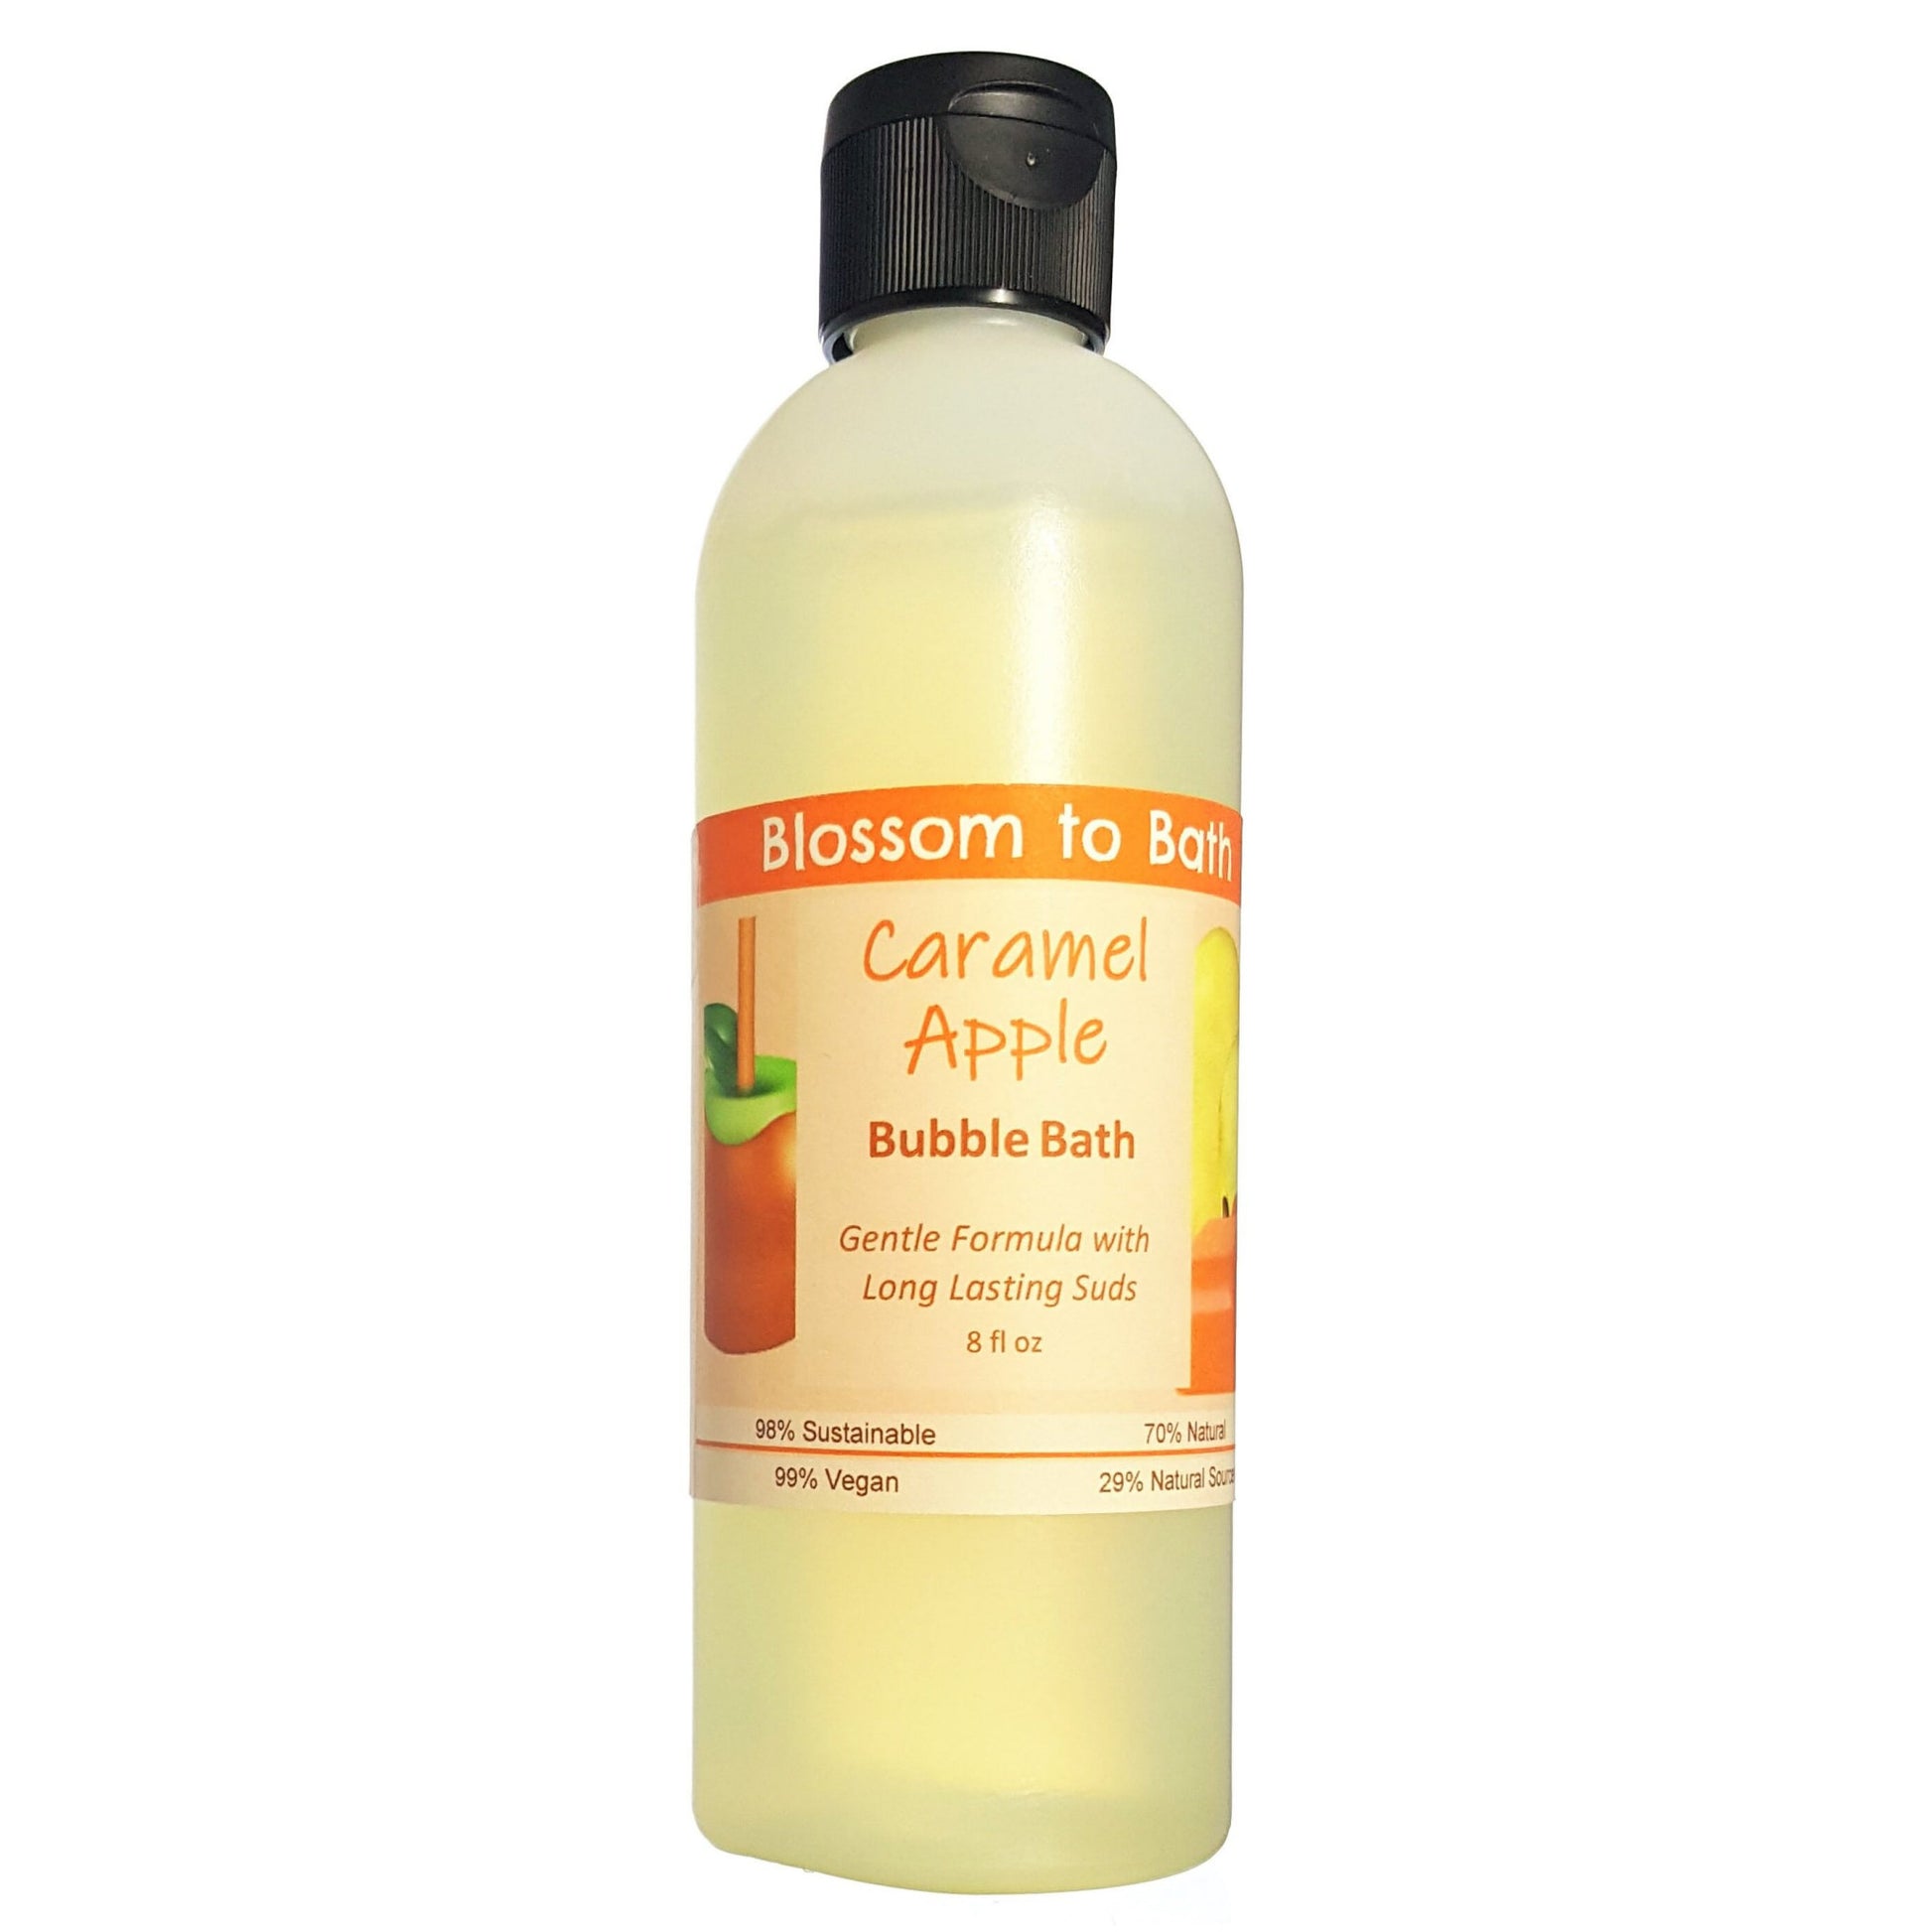 Buy Blossom to Bath Caramel Apple Bubble Bath from Flowersong Soap Studio.  Lively, long lasting  bubbles in a gentle plant based formula for maximum relaxation time  Bright fresh apple and warm rich caramel - a joyful combination of crisp fruit wrapped in decadent sweetness.